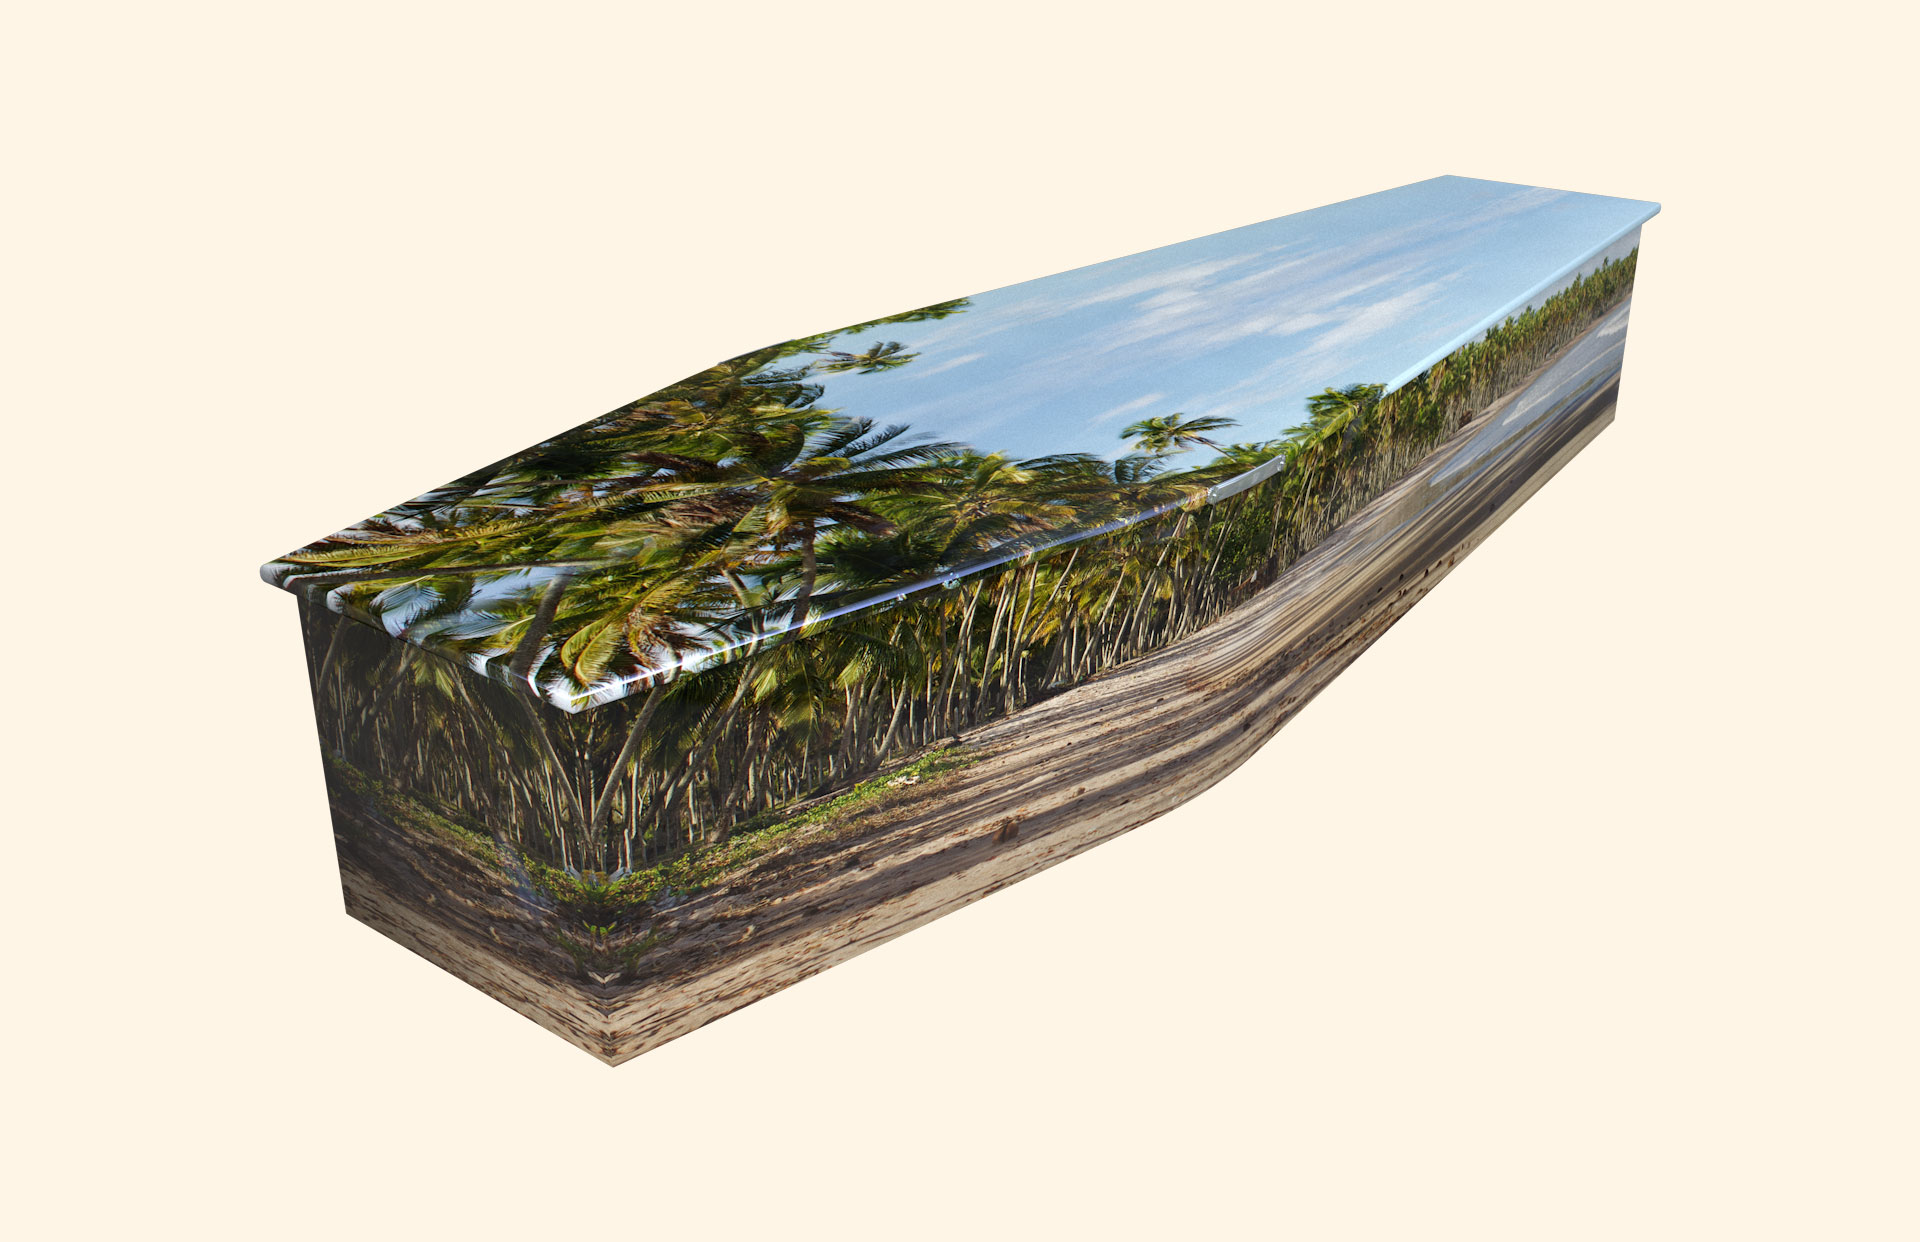 Paradise design on a traditional coffin